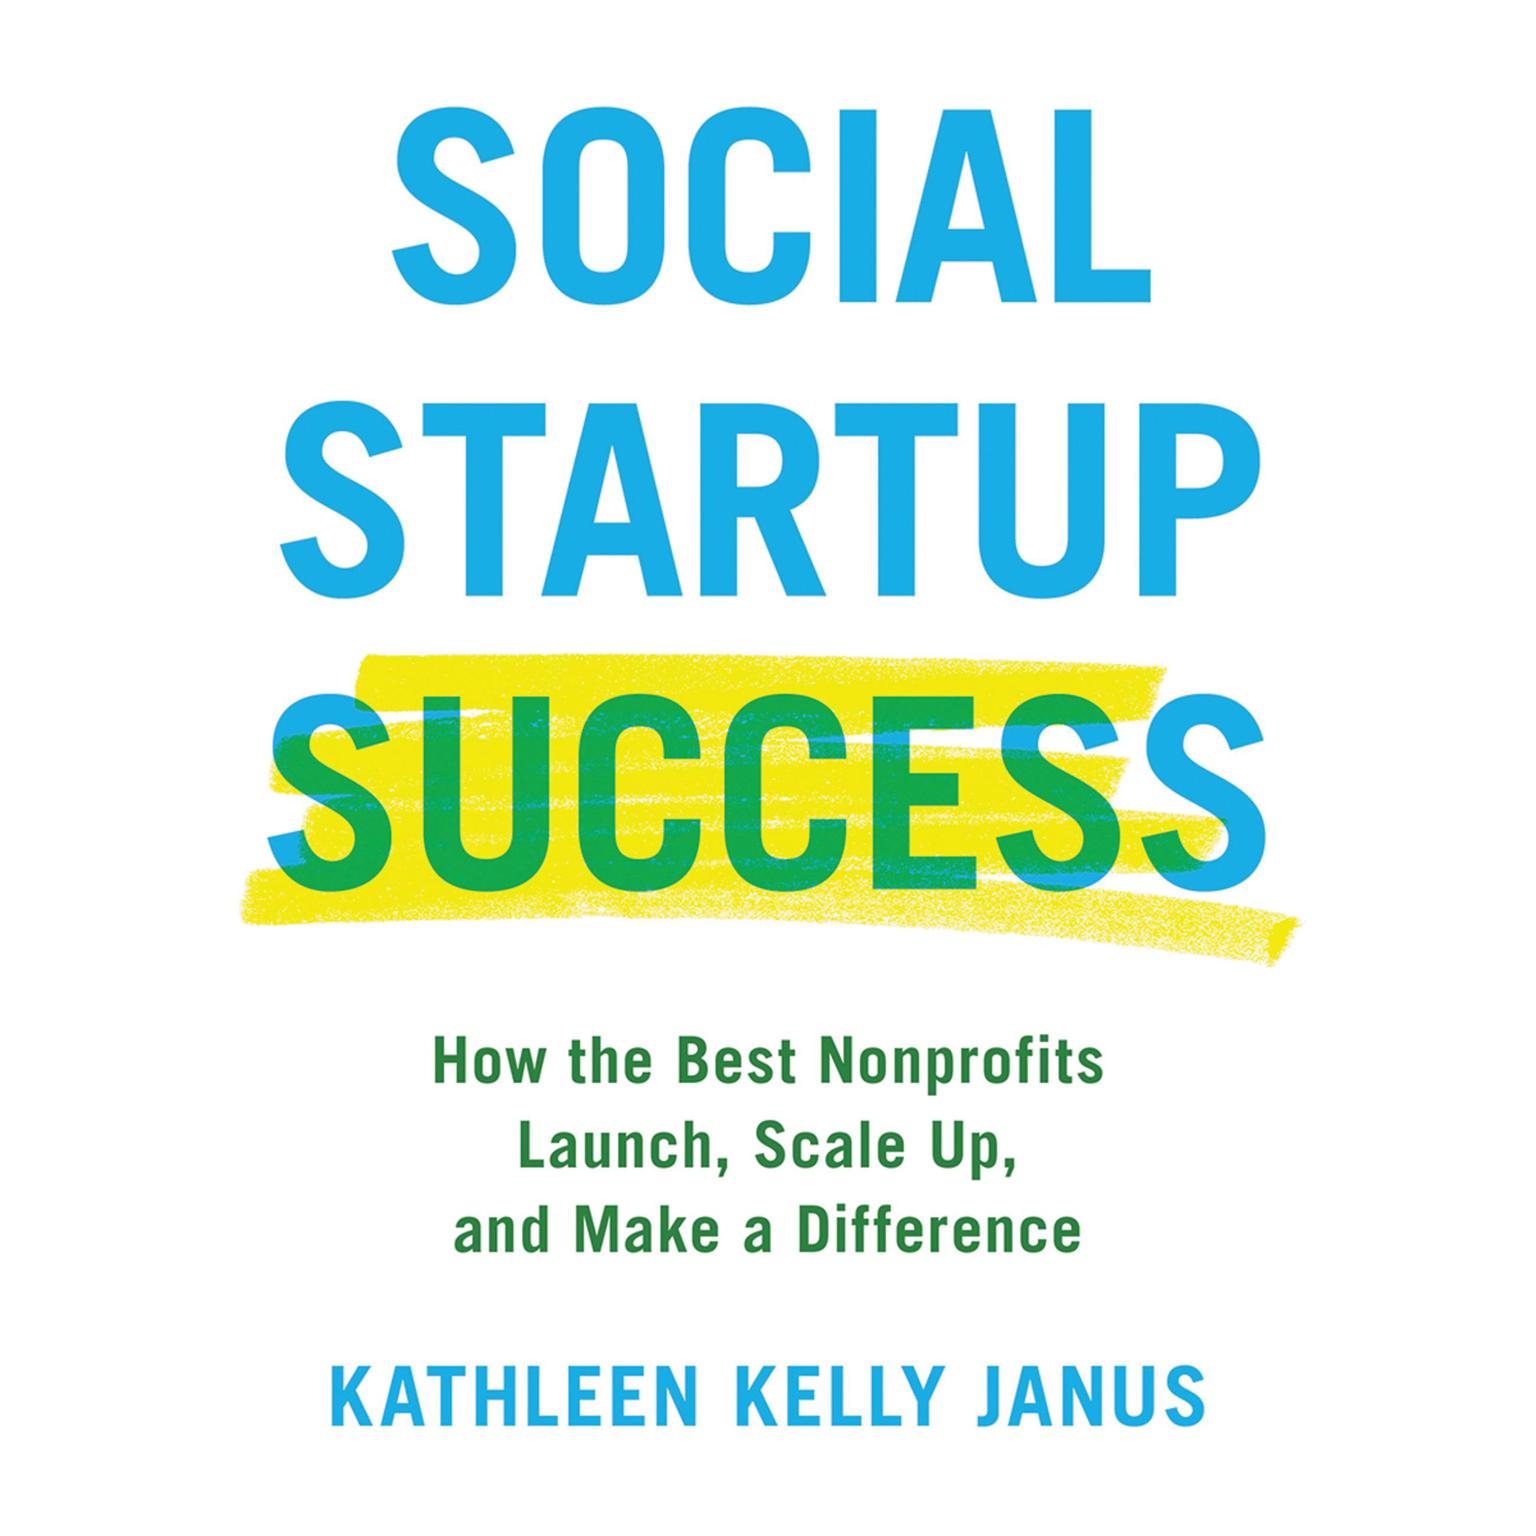 Social Startup Success: How the Best Nonprofits Launch, Scale Up, and Make a Difference Audiobook, by Kathleen Kelly Janus